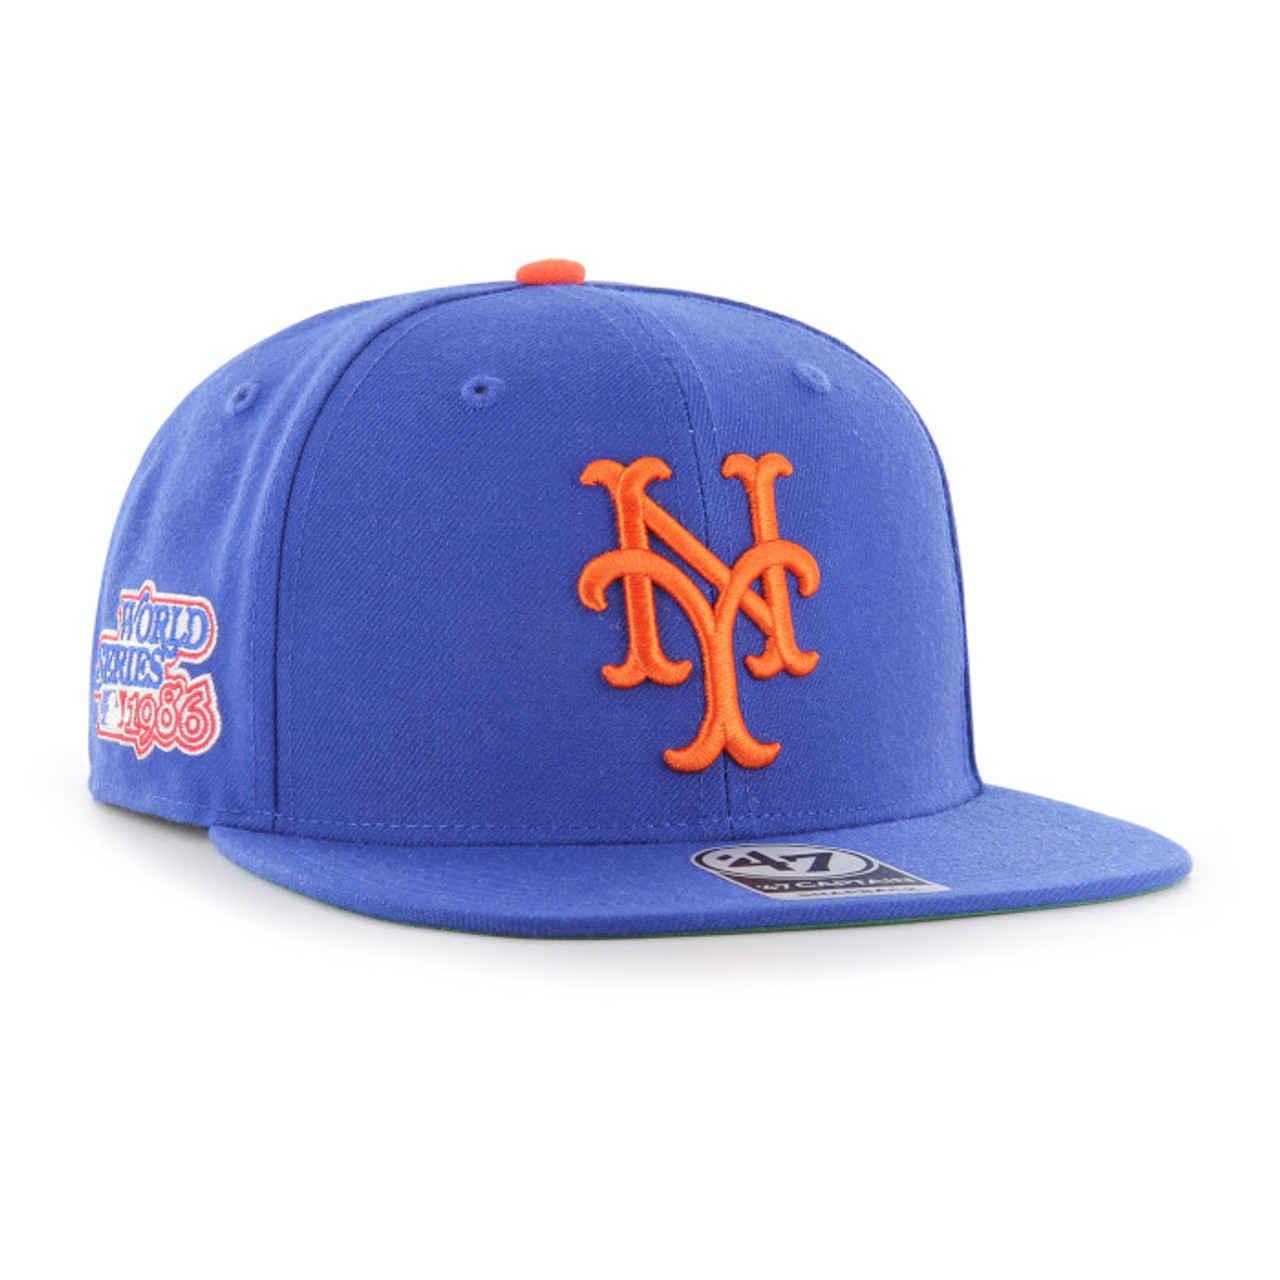 https://cdn11.bigcommerce.com/s-m8z8akveha/images/stencil/1280x1280/products/24664/108797/Men-s-47-Brand-New-York-Mets-1986-World-Series-Patch-Cooperstown-Collection-Sure-Shot-Royal-Snapback-Adjustable-Cap__S_2__89771.1678138918.jpg?c=1